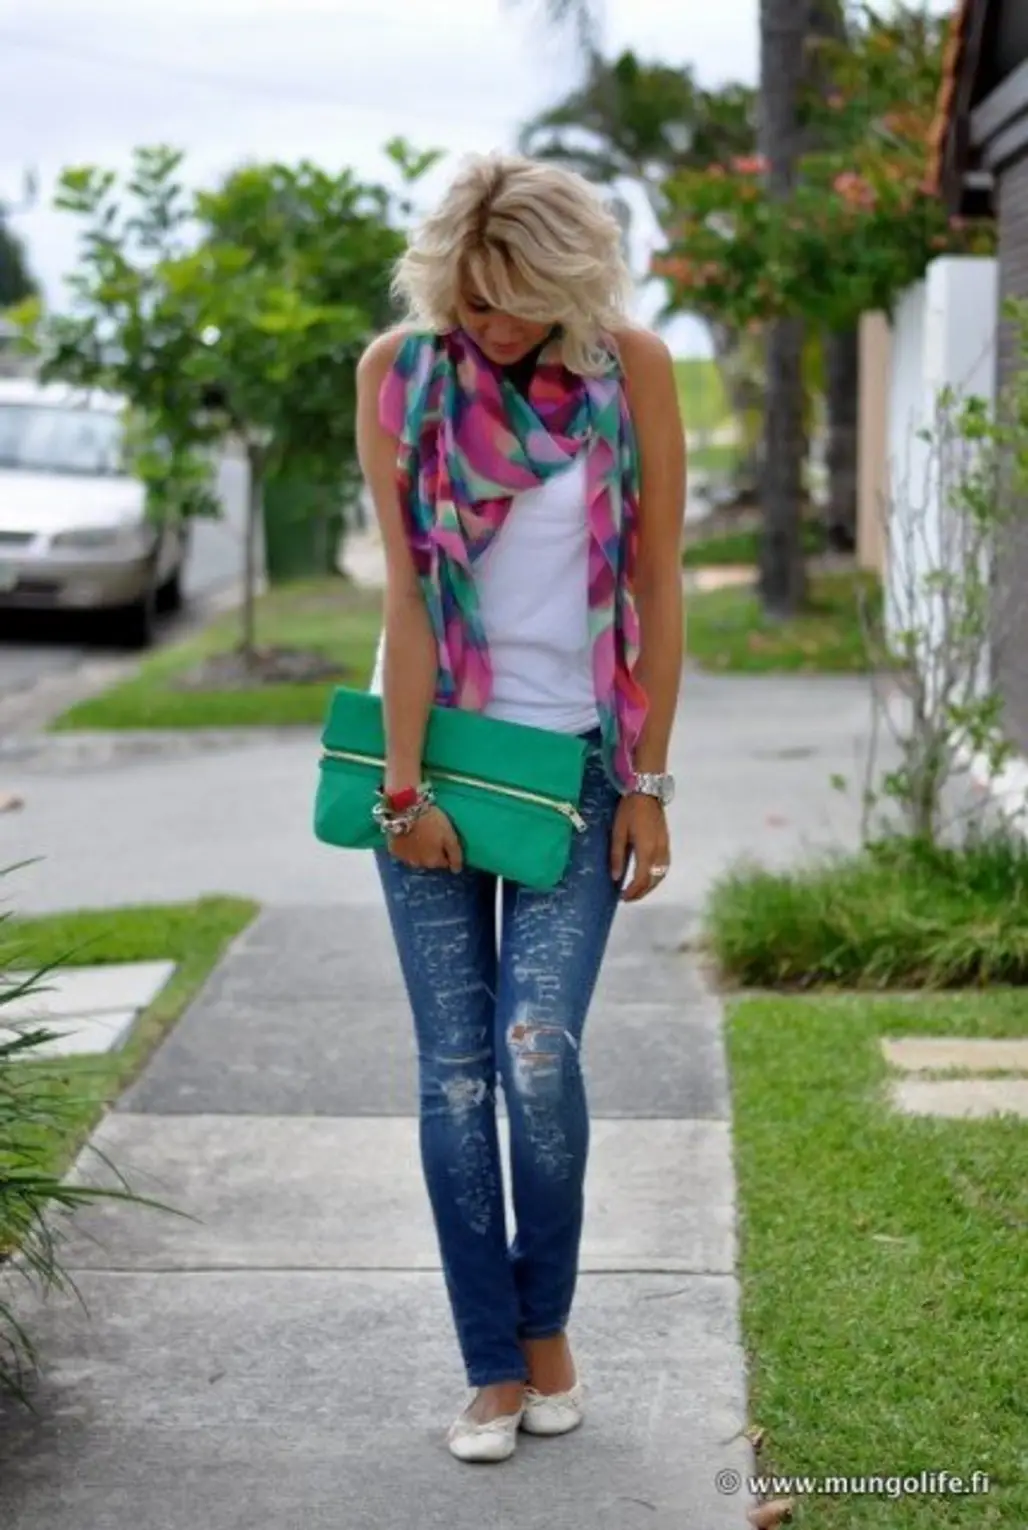 Add Some Pizzazz to Your Outfit with a Summer Scarf